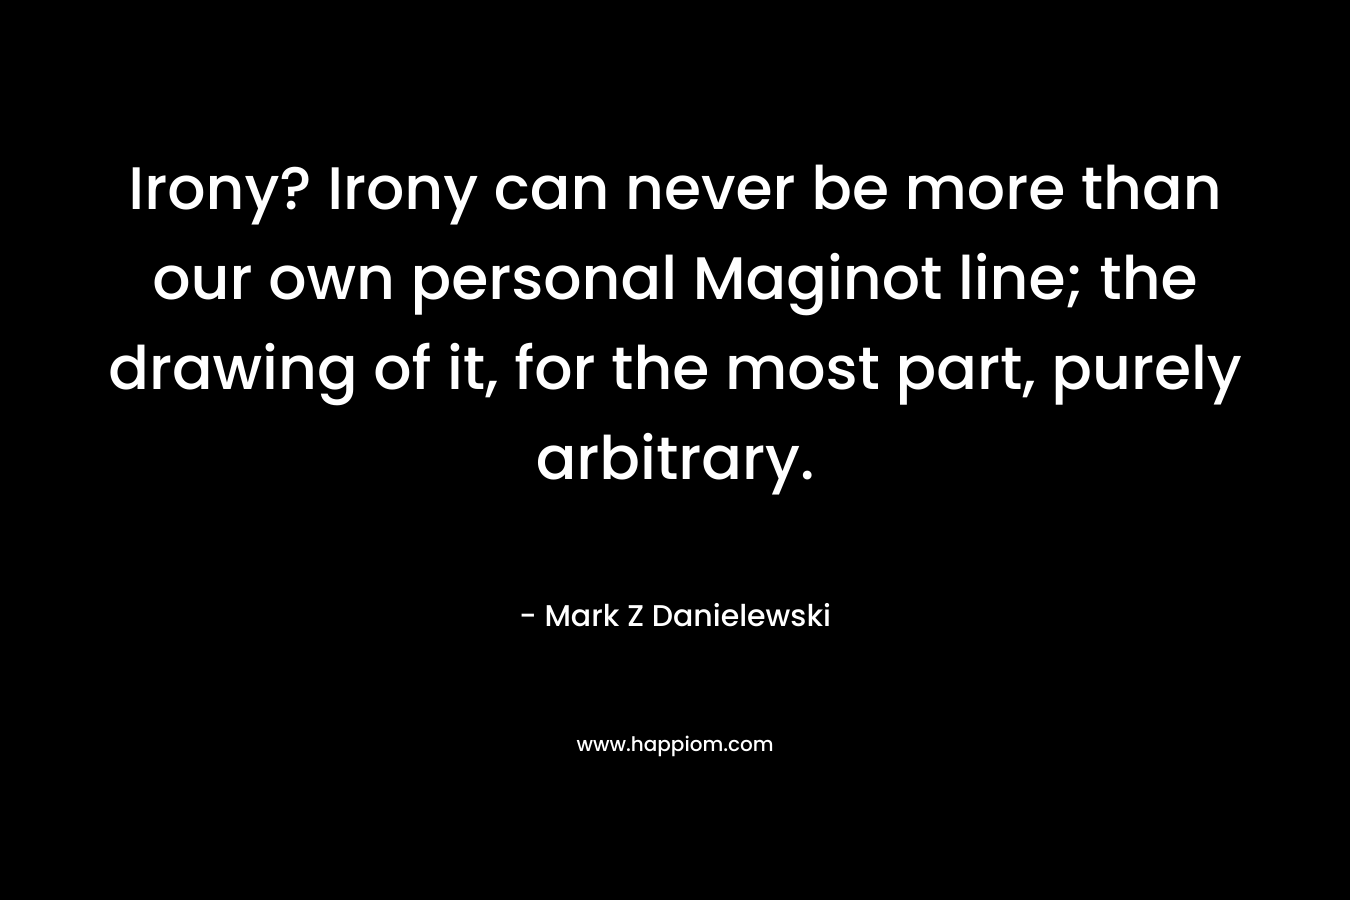 Irony? Irony can never be more than our own personal Maginot line; the drawing of it, for the most part, purely arbitrary. – Mark Z Danielewski